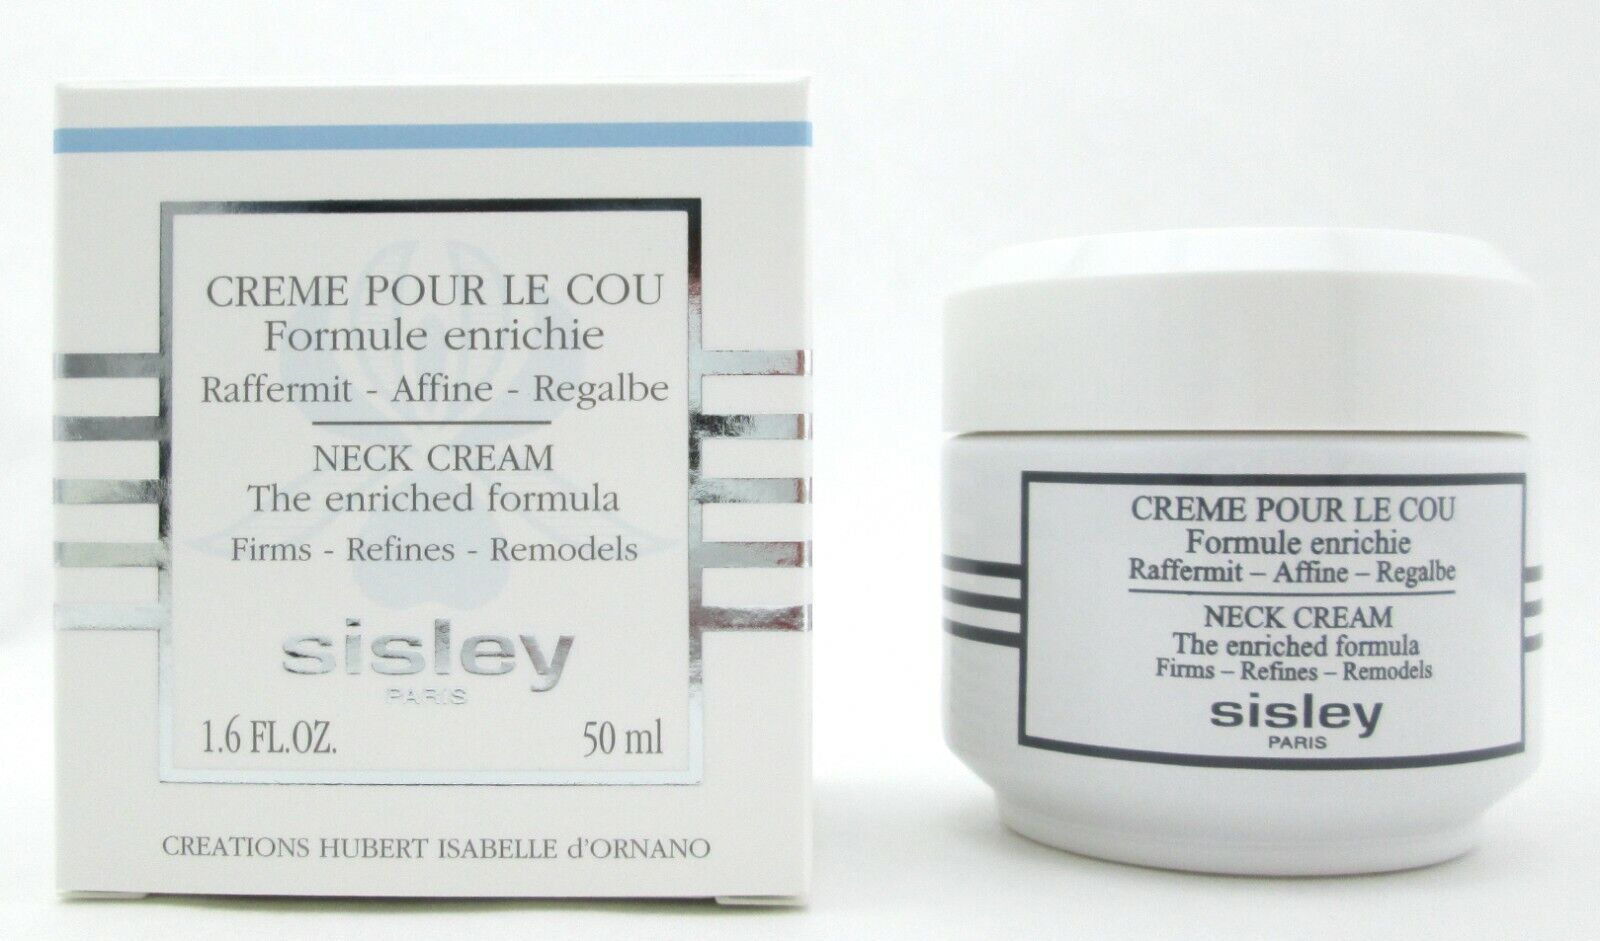 Sisley Neck Cream The Enriched Formula Firms, Refines, Remodels 1.6 oz./ 50 ml.